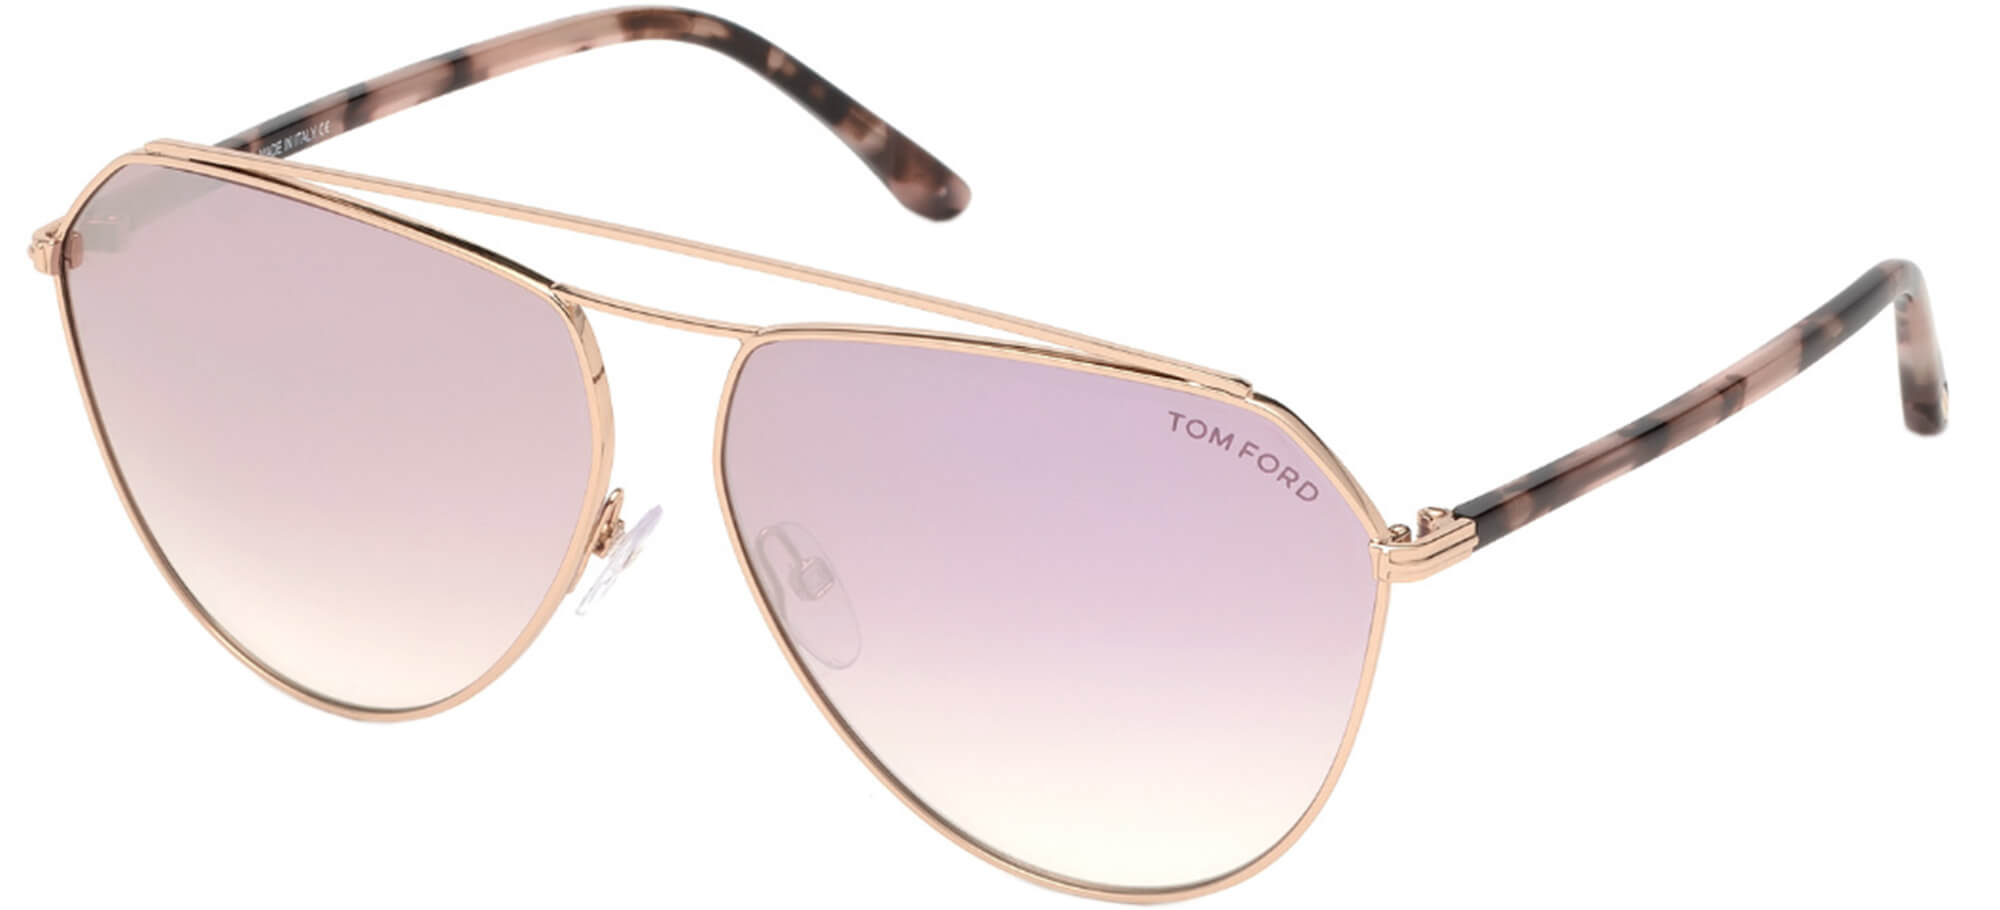 Tom FordBINX FT 0681Rose Gold/red Shaded (28Z E)